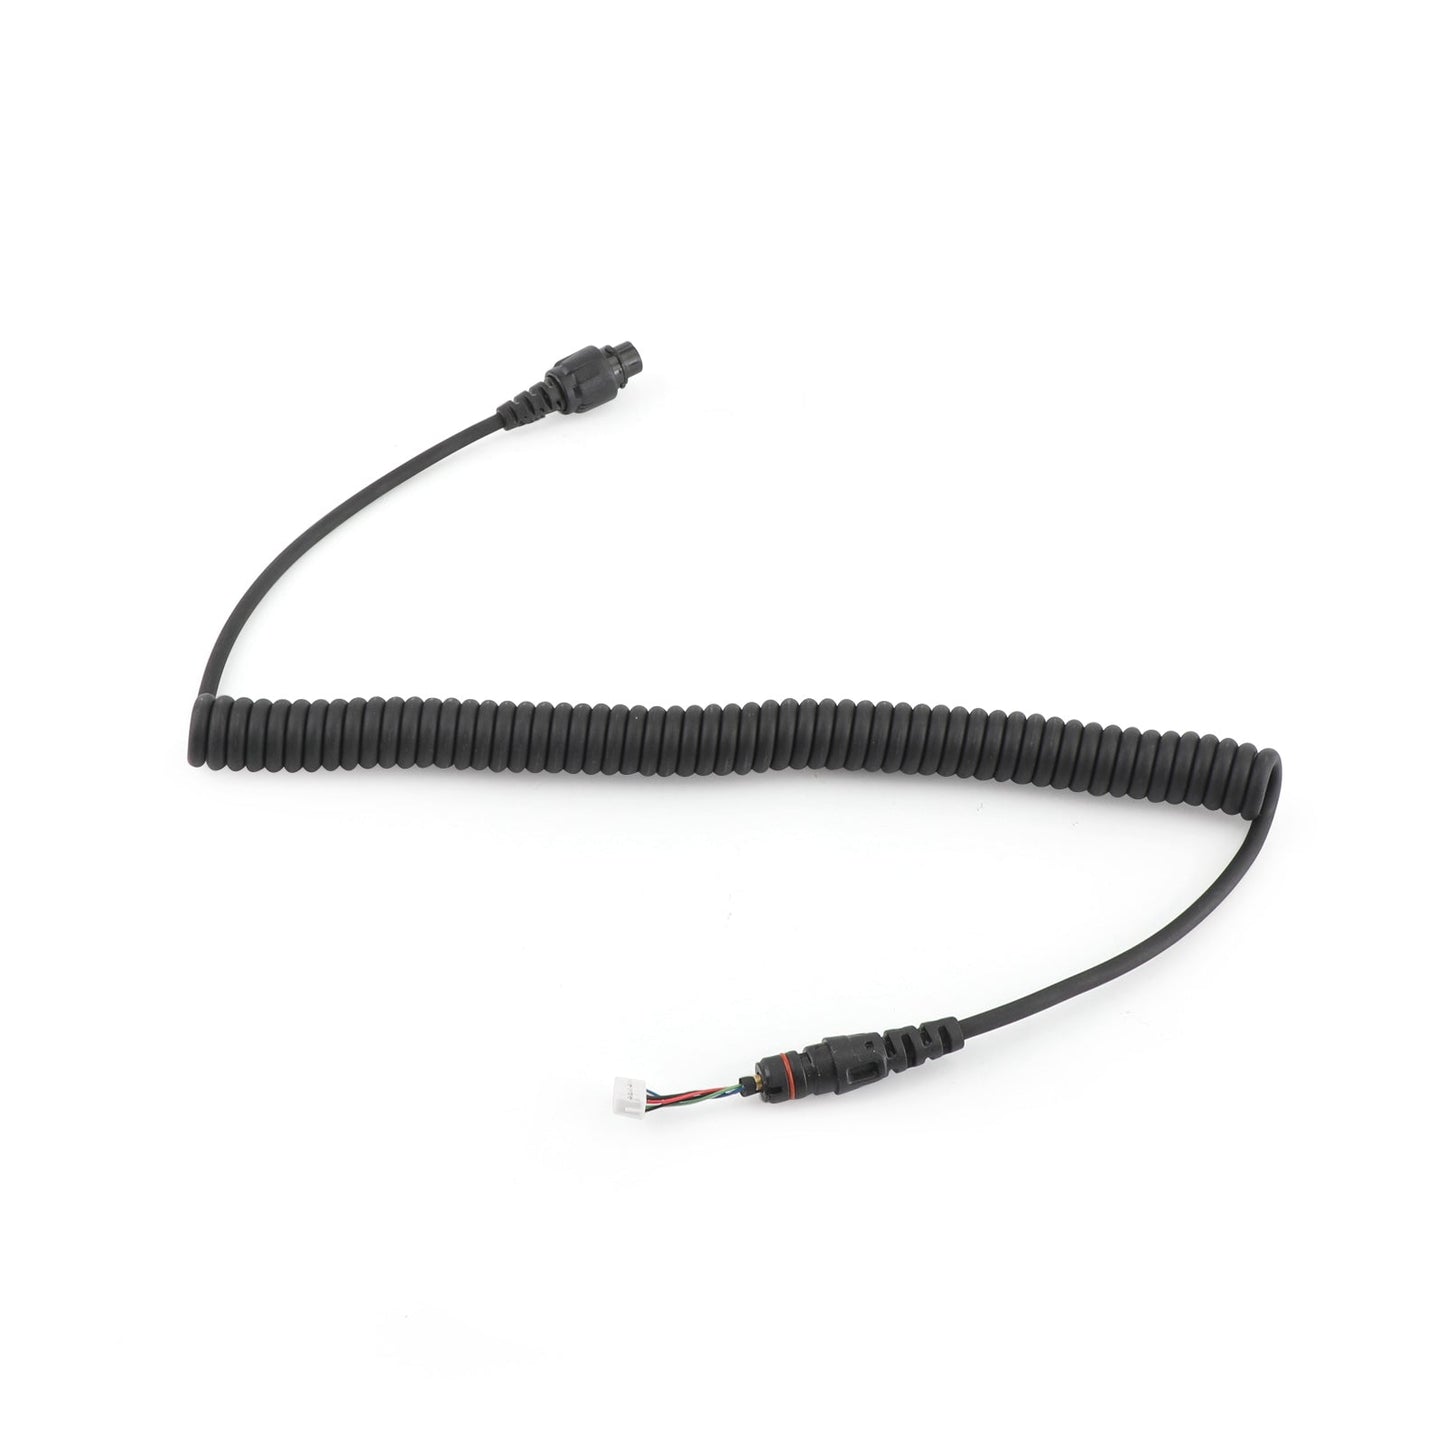 10 Pin Aviation Speaker Mic Cable Fit for Hytera MD780/G MD782U RD982U RD980